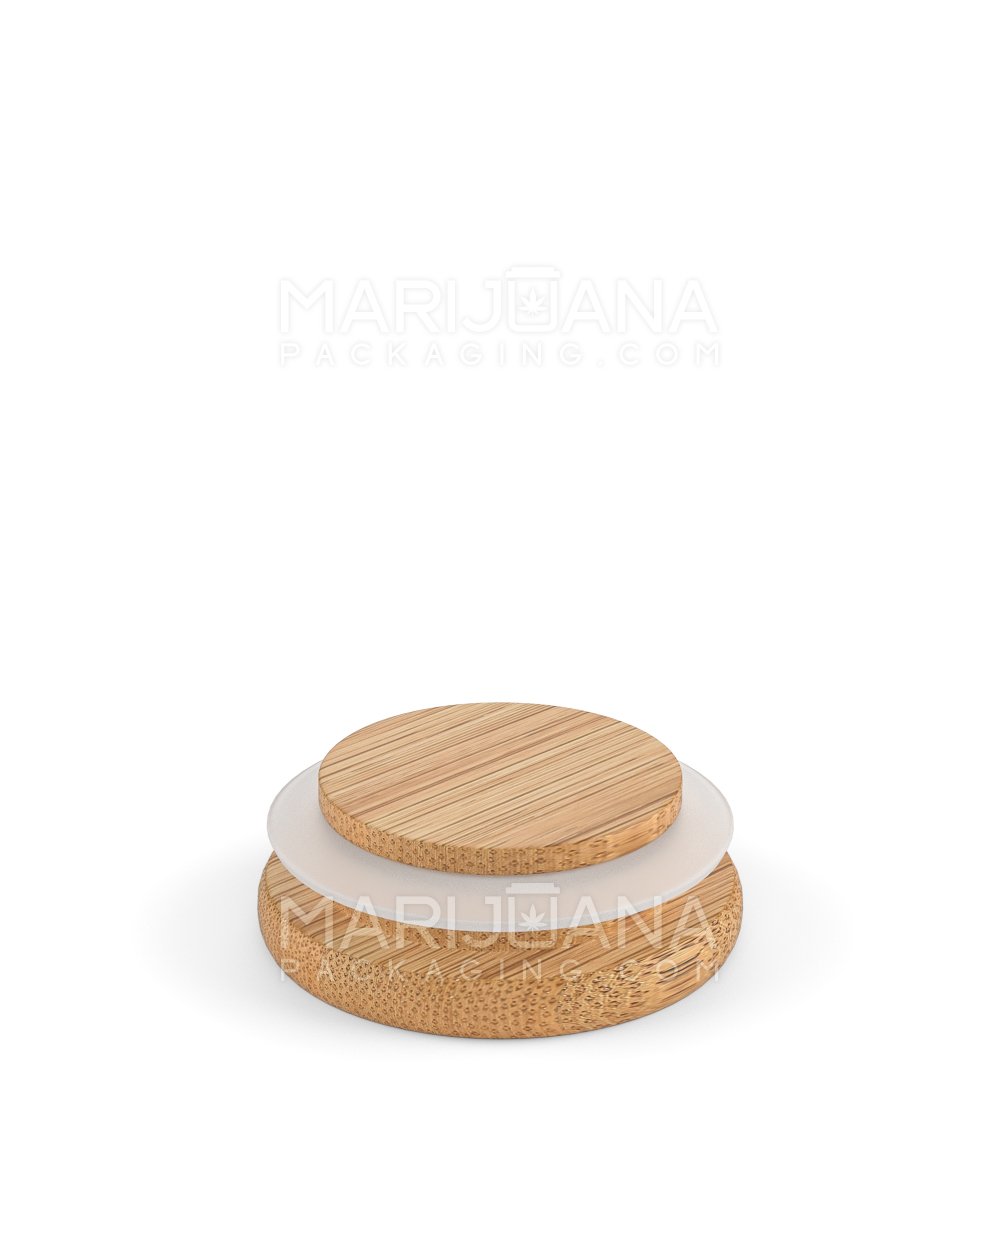 Glass Jar with Wooden Lid | 4oz - 32 Dram - 120 Count - 12